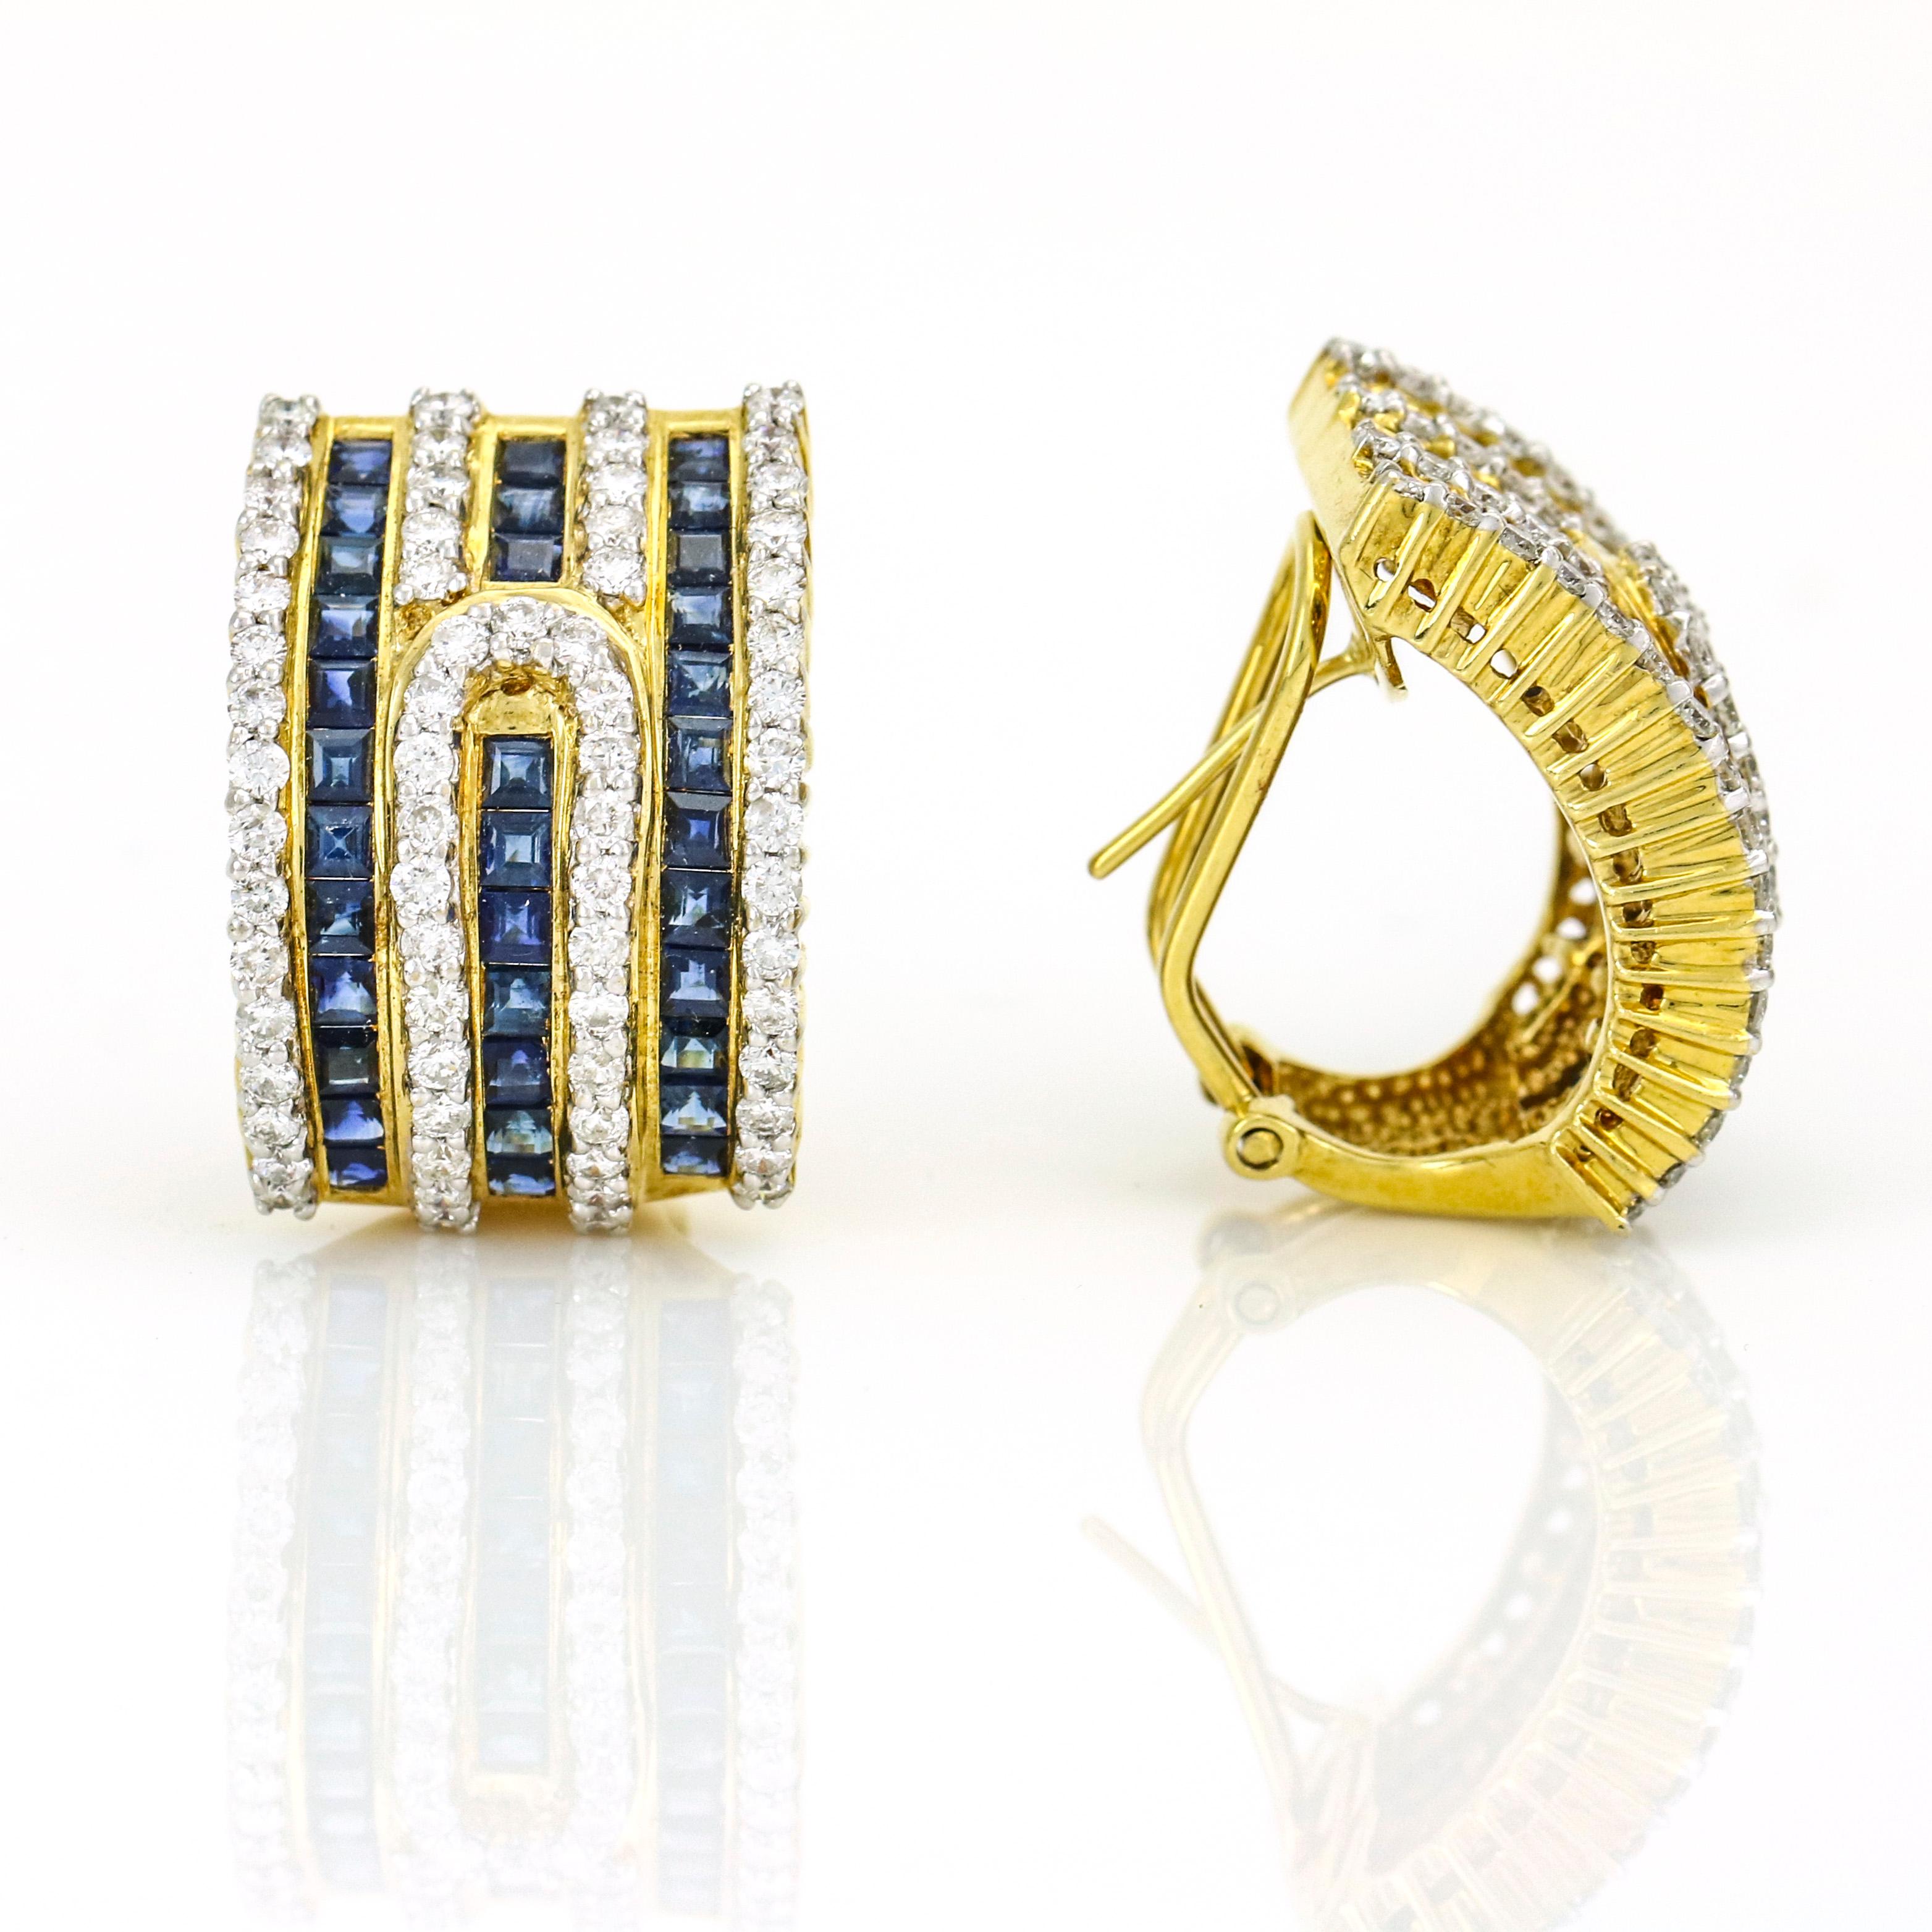 Retro half-hoop earrings channel set with princess-cut blue sapphires and prong set with round diamonds crafted in 18 karat yellow gold. Omega backs. Estimated total carat weight of diamonds, 1.45 carats. Approximate carat weight of sapphires, 2.15